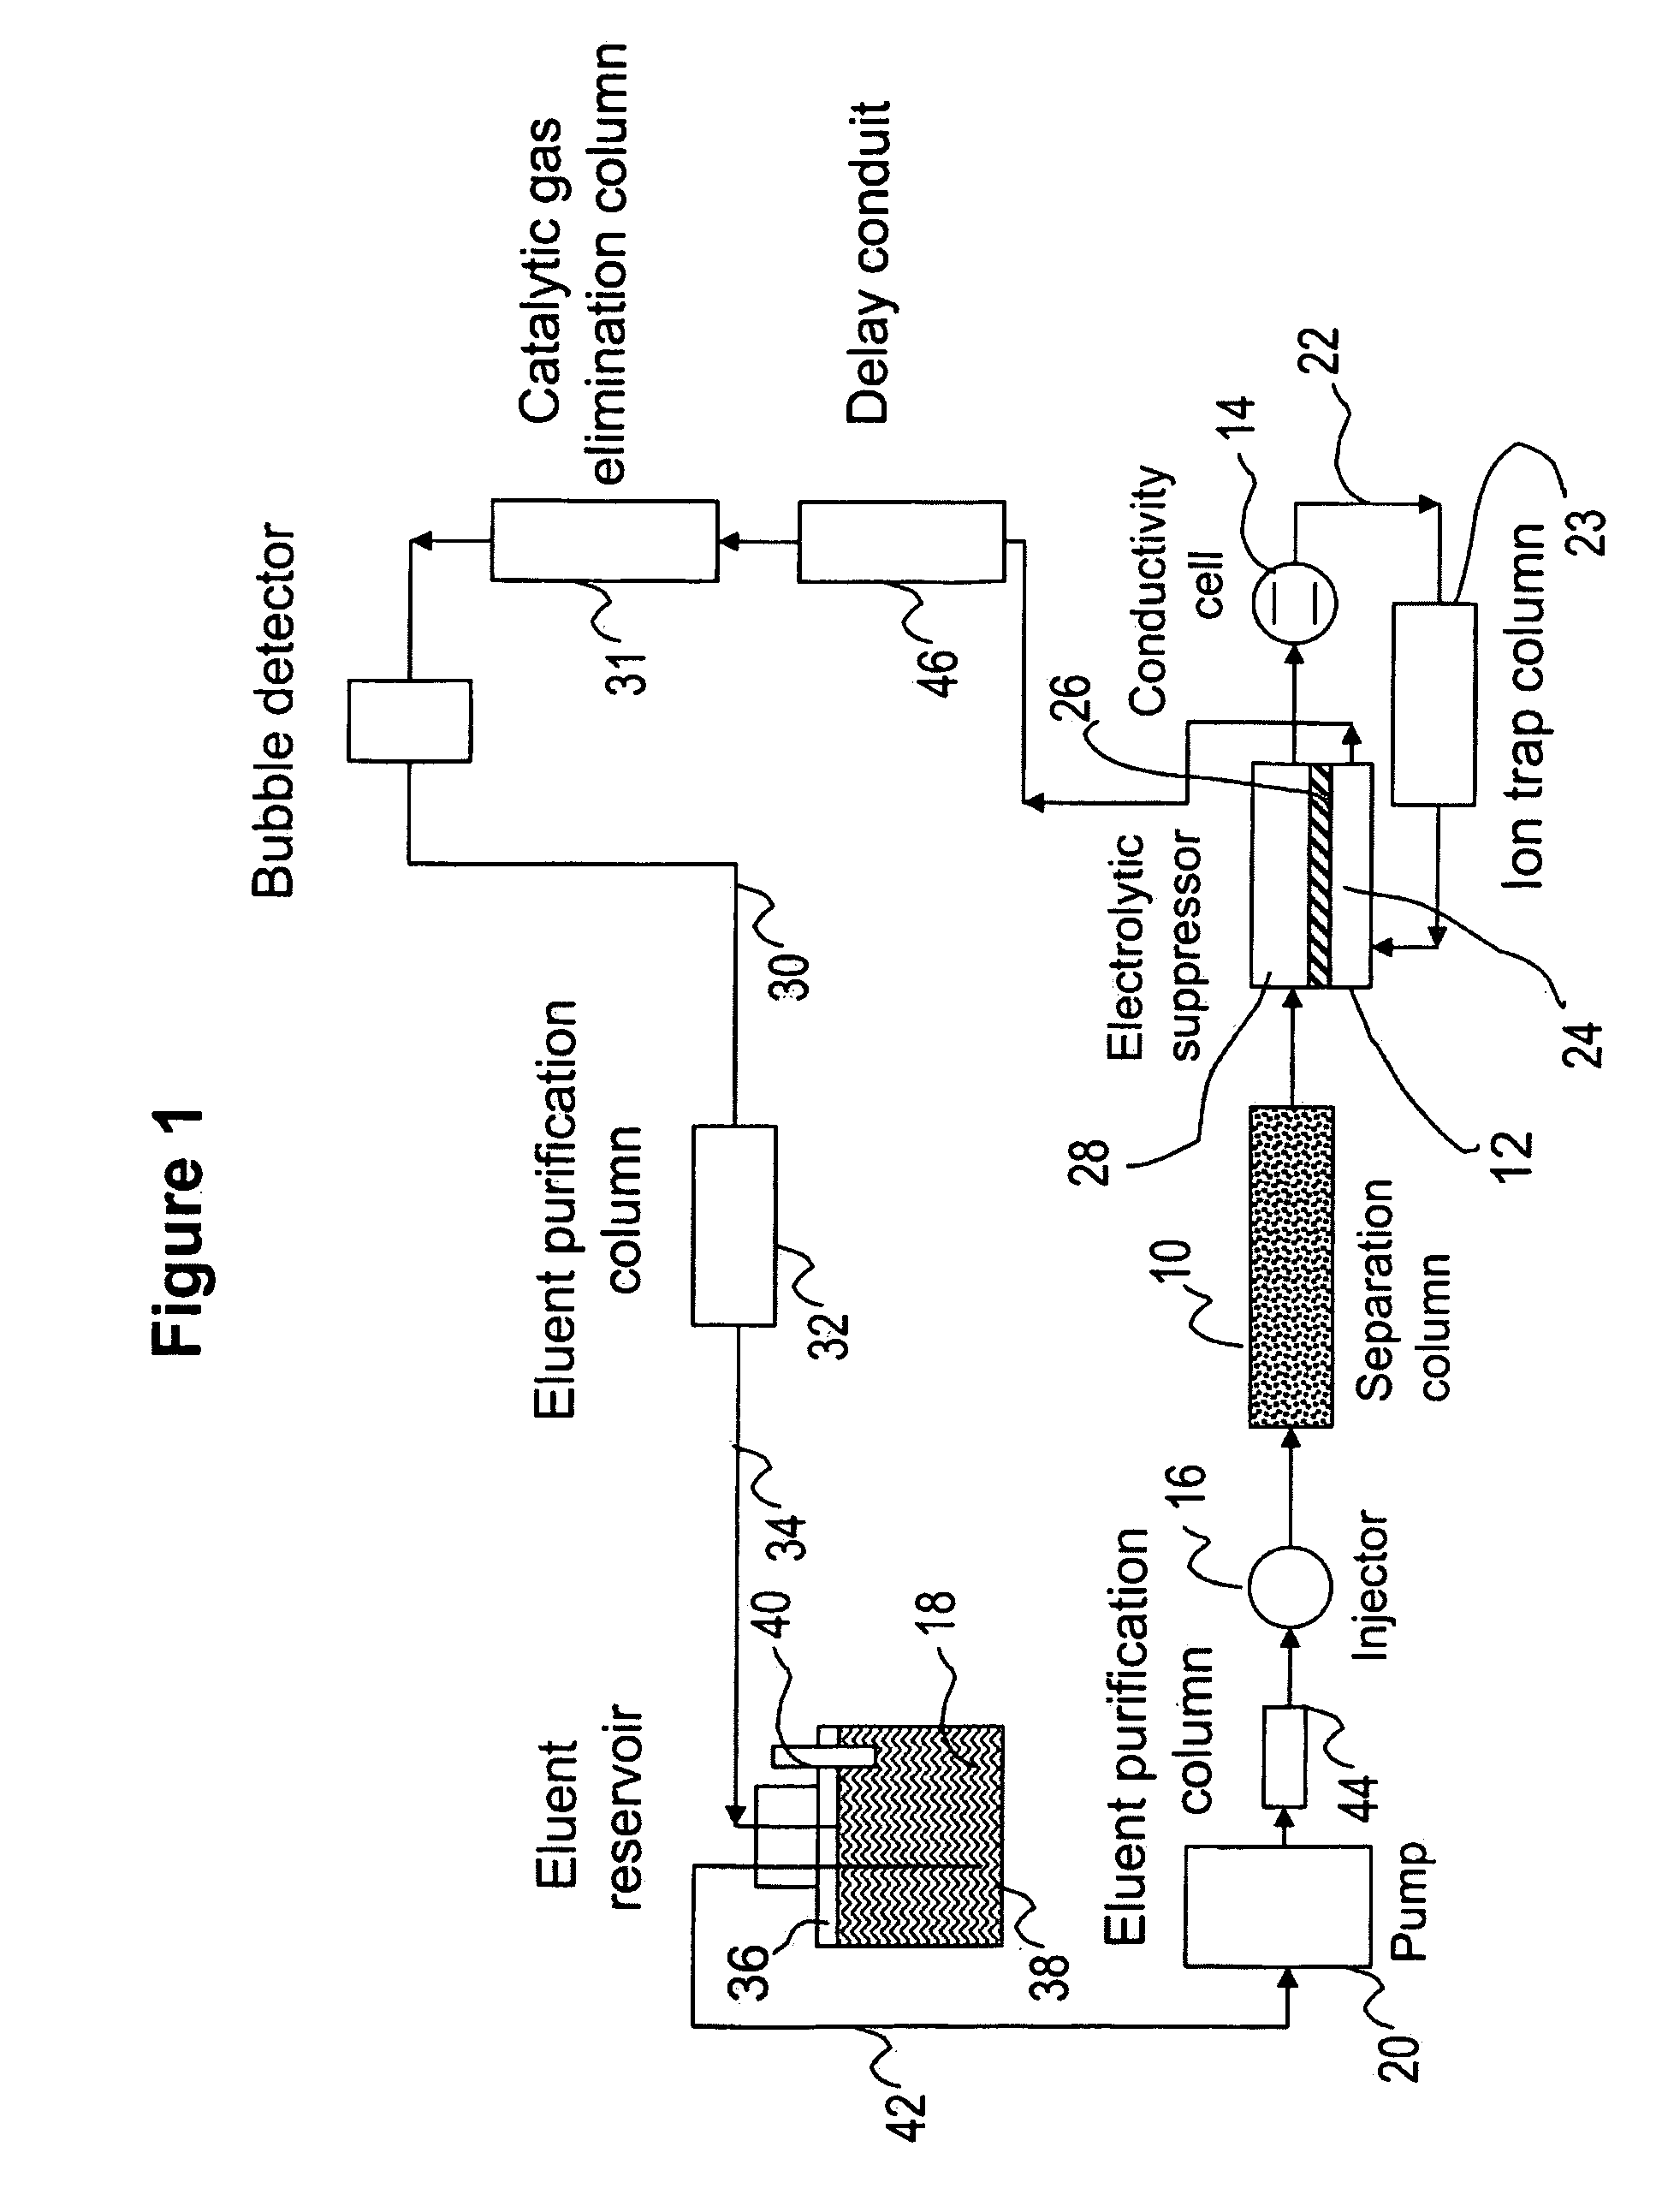 Ion chromatography system with flow-delay eluent recycle